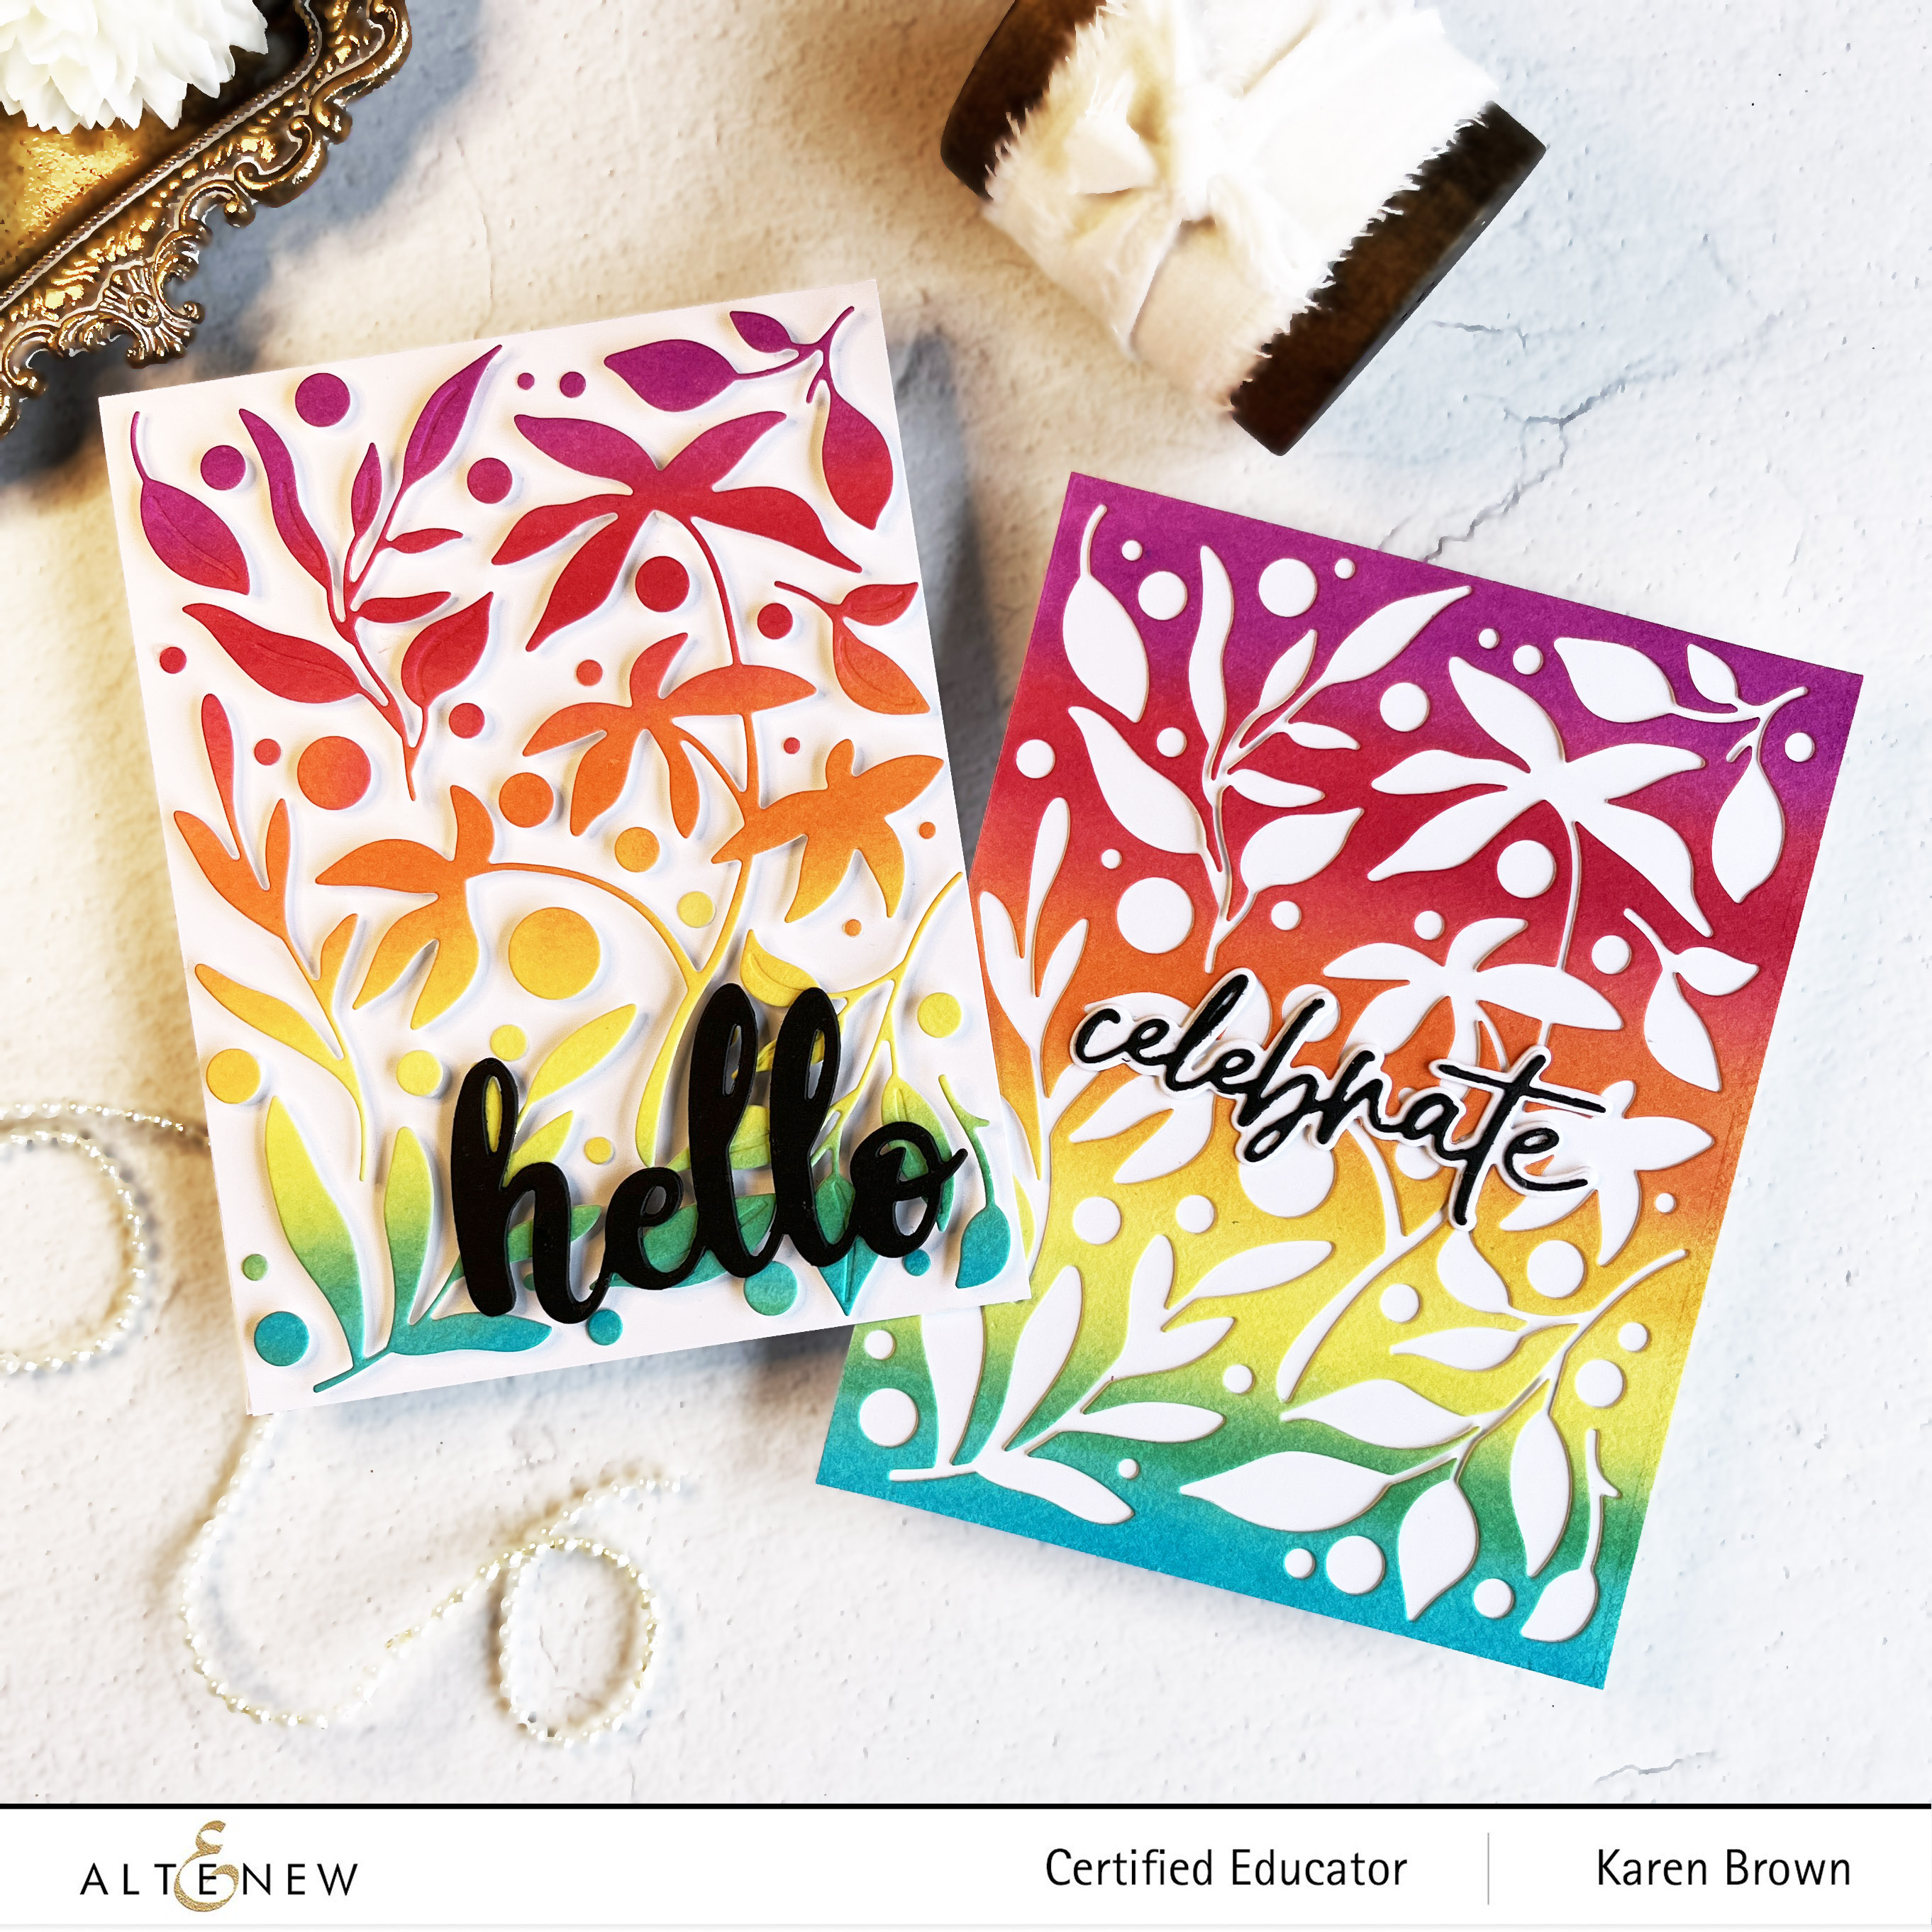 2-For-1 Cards with Altenew's Zero Waste Leaf Pattern Cover Die.